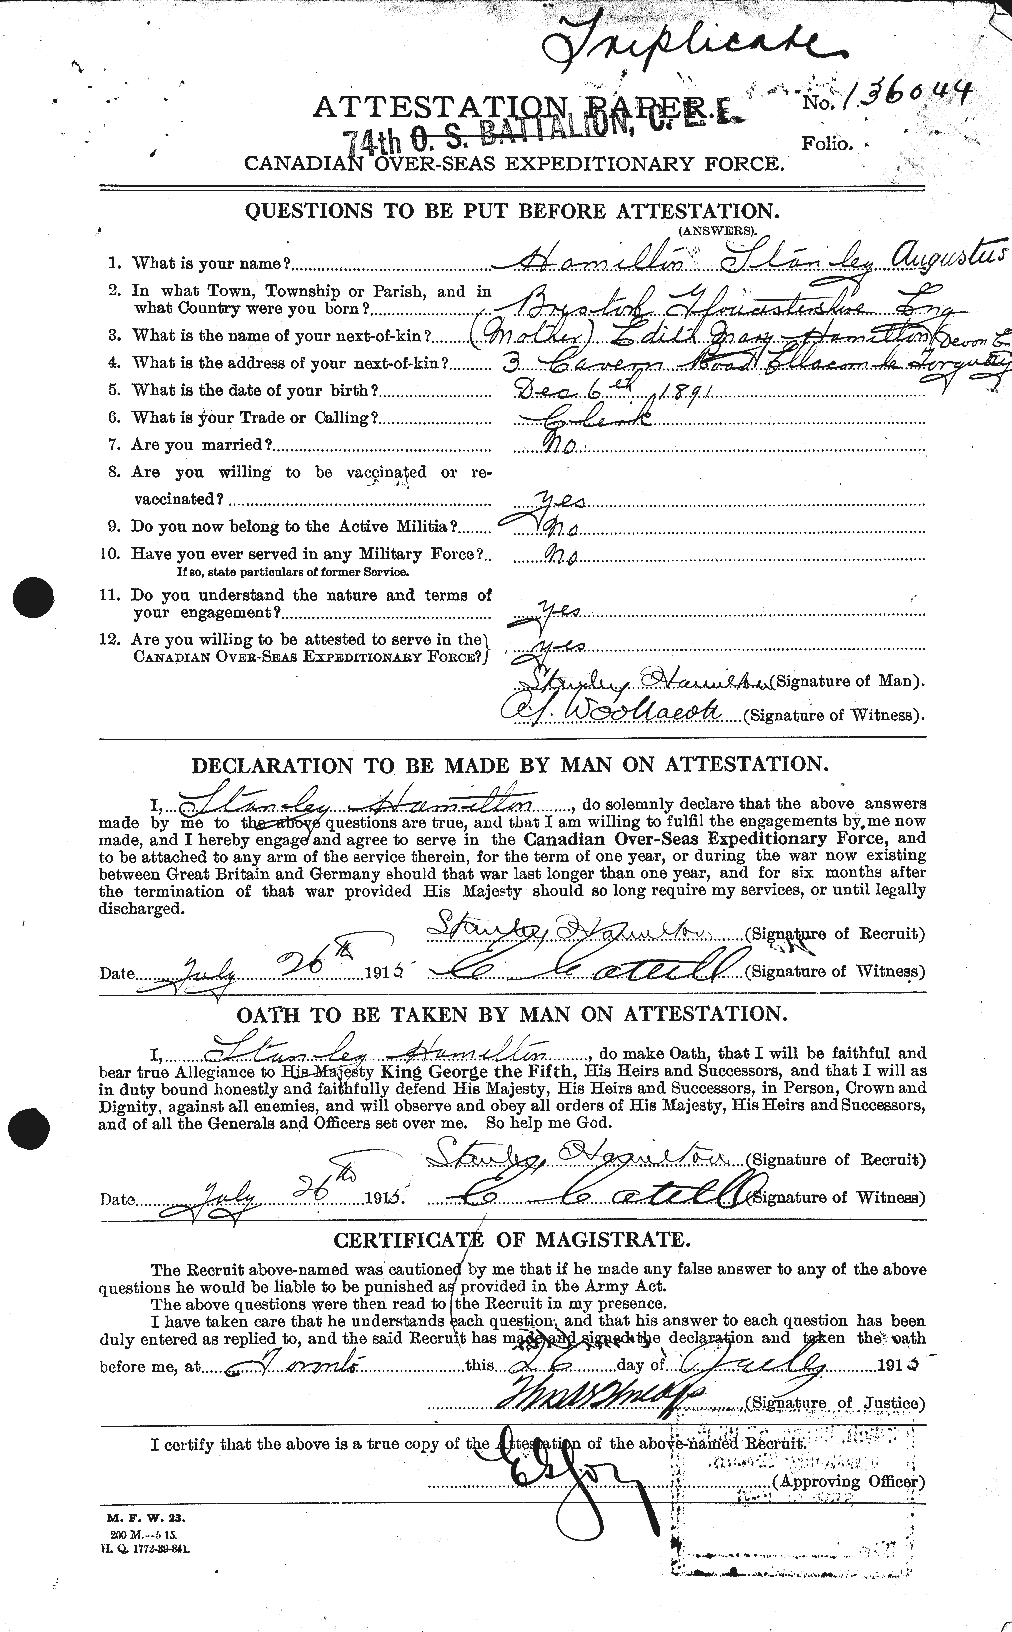 Personnel Records of the First World War - CEF 373317a